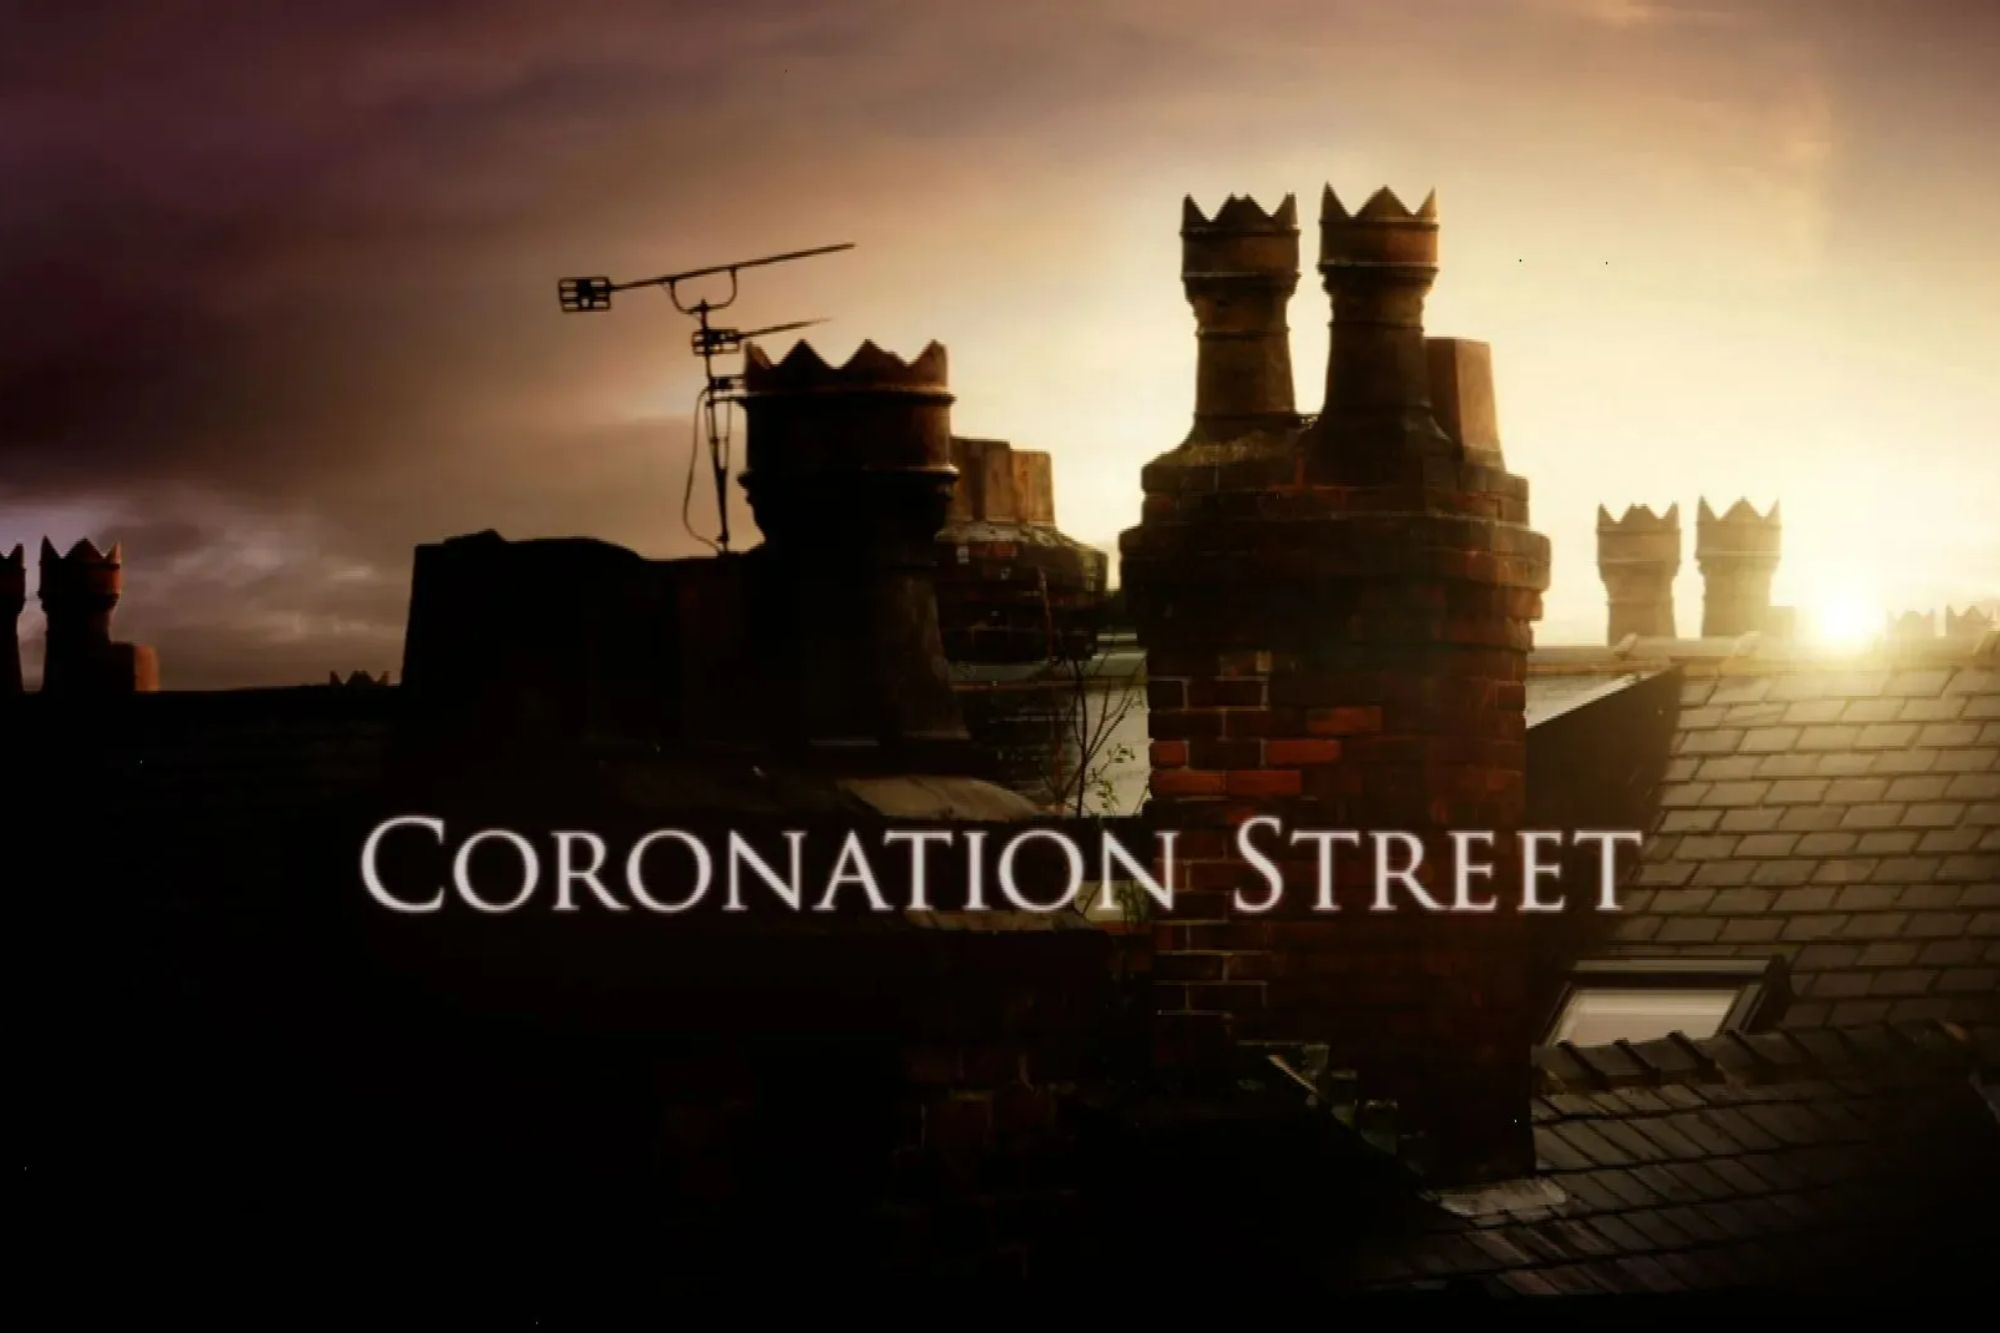 Coronation Street legend comes out of retirement 26 years after quitting role